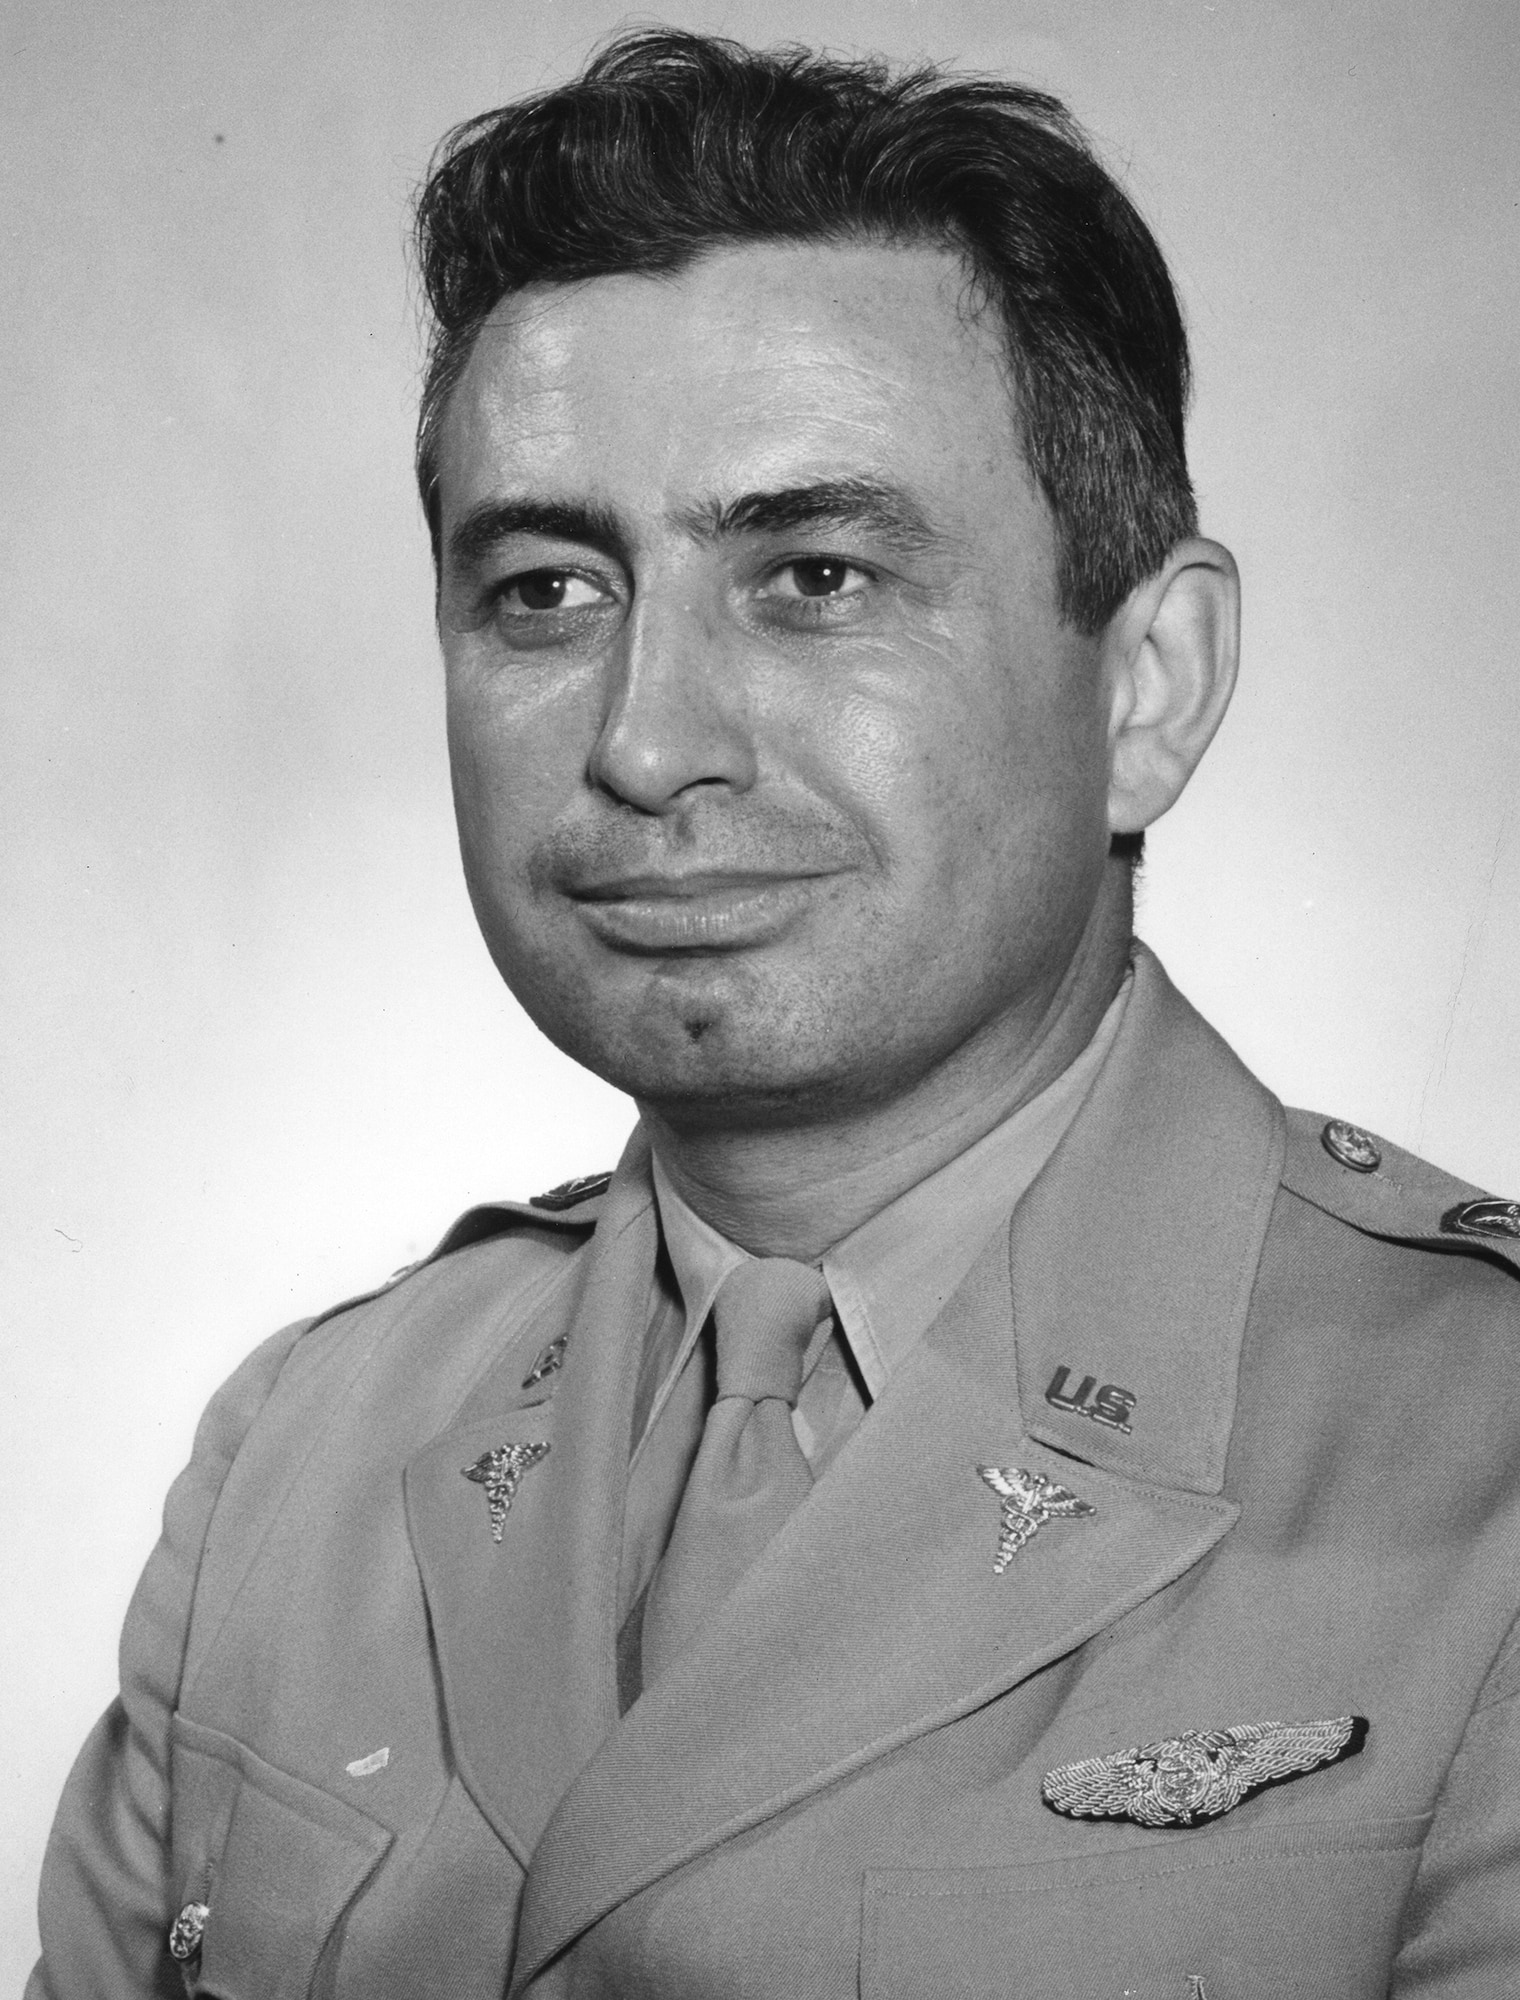 Studio portrait photograph of Lt. Col. William Randolph Lovelace, II, - U.S. Army Air Corps Medical Corps, who completed an extremely high parachute jump. June 29, 1943.